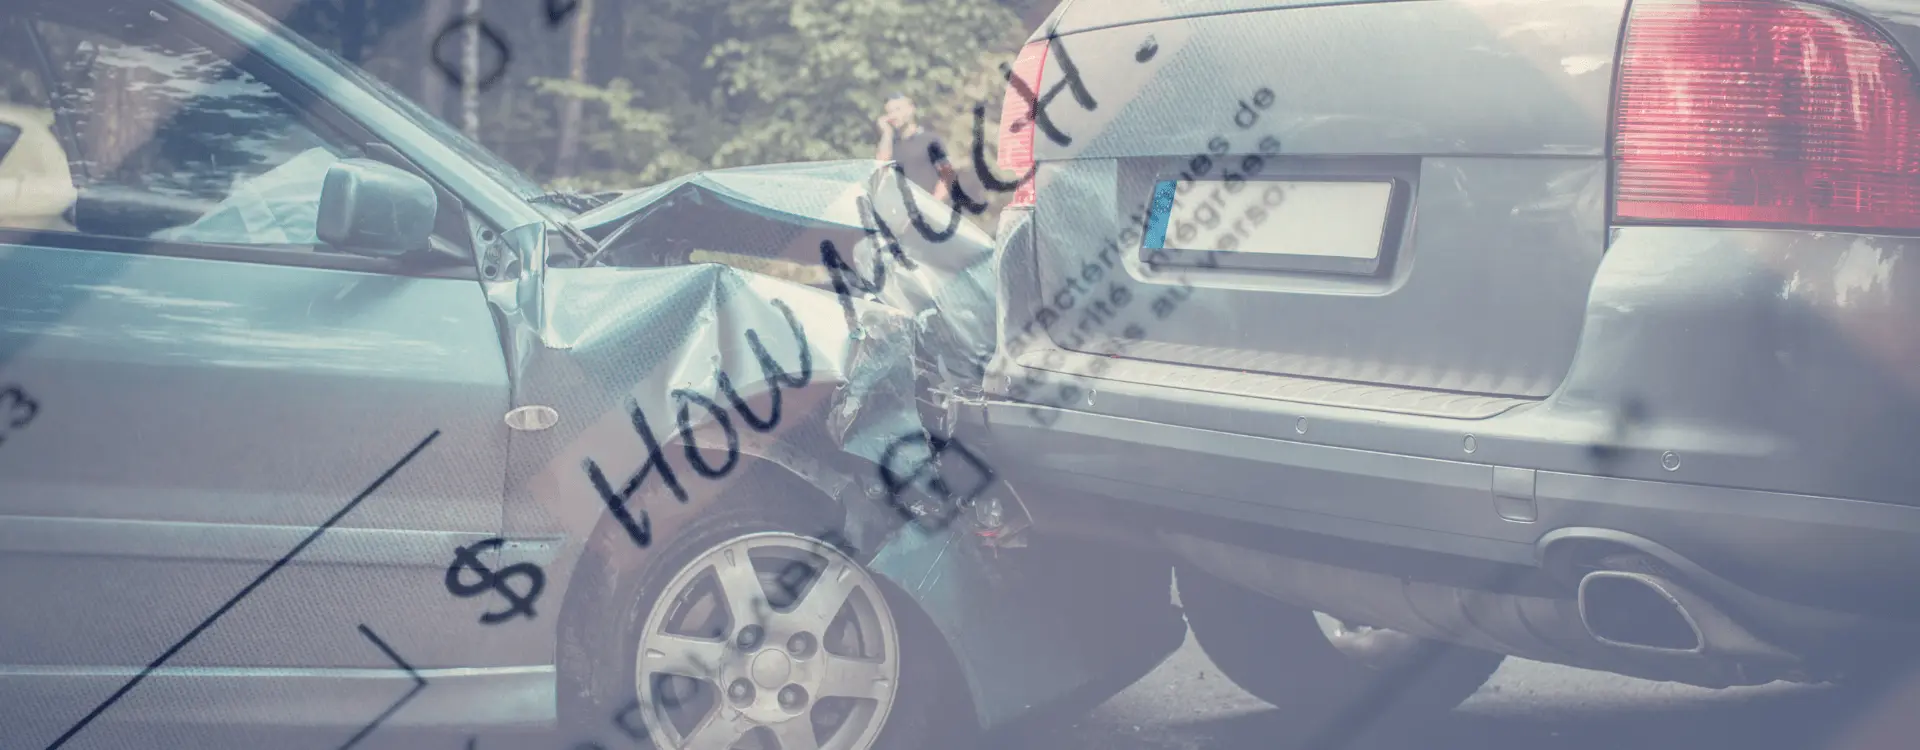 how much to expect from car accident settlement california